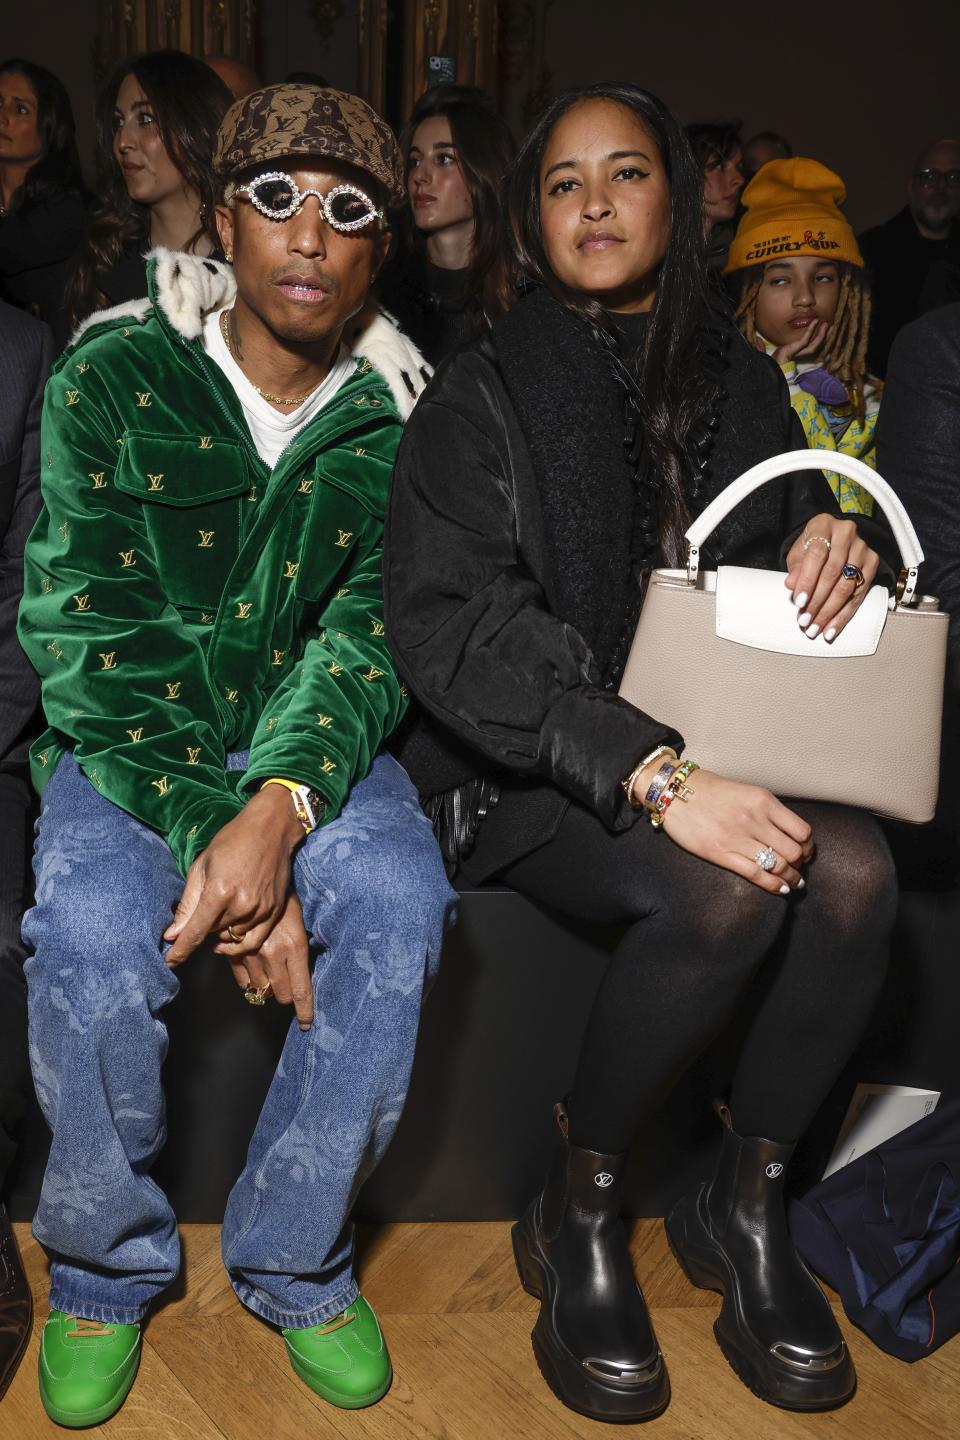 Pharrell Williams, left, and Helen Lasichanh attend the Louis Vuitton Fall/Winter 2023-2024 ready-to-wear collection presented Monday, March 6, 2023 in Paris. (Vianney Le Caer/Invision/AP)